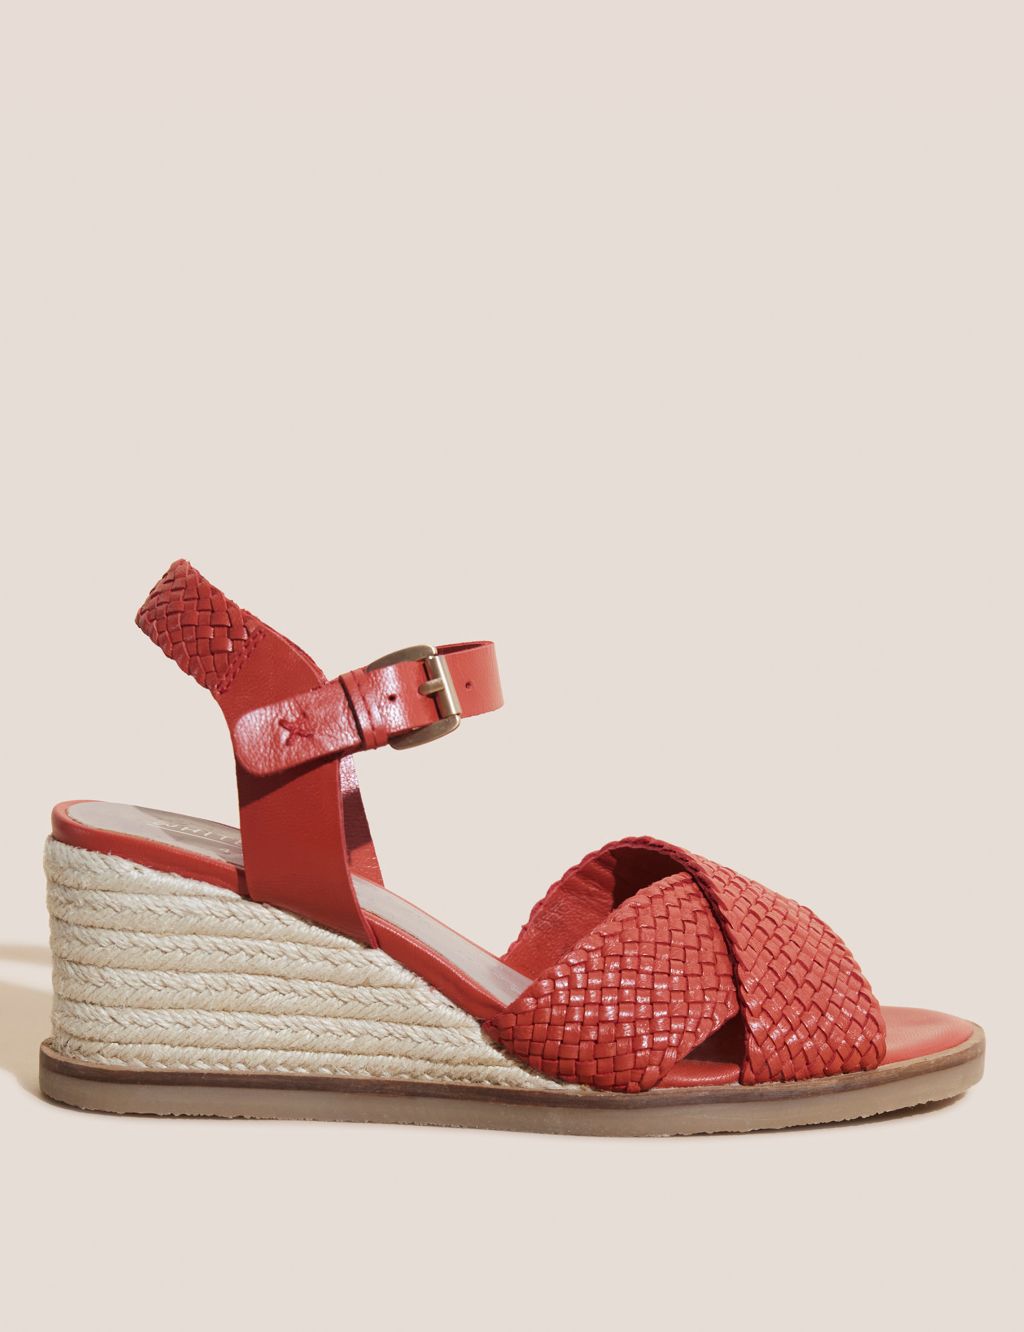 Leather Woven Ankle Strap Wedge Sandals image 1